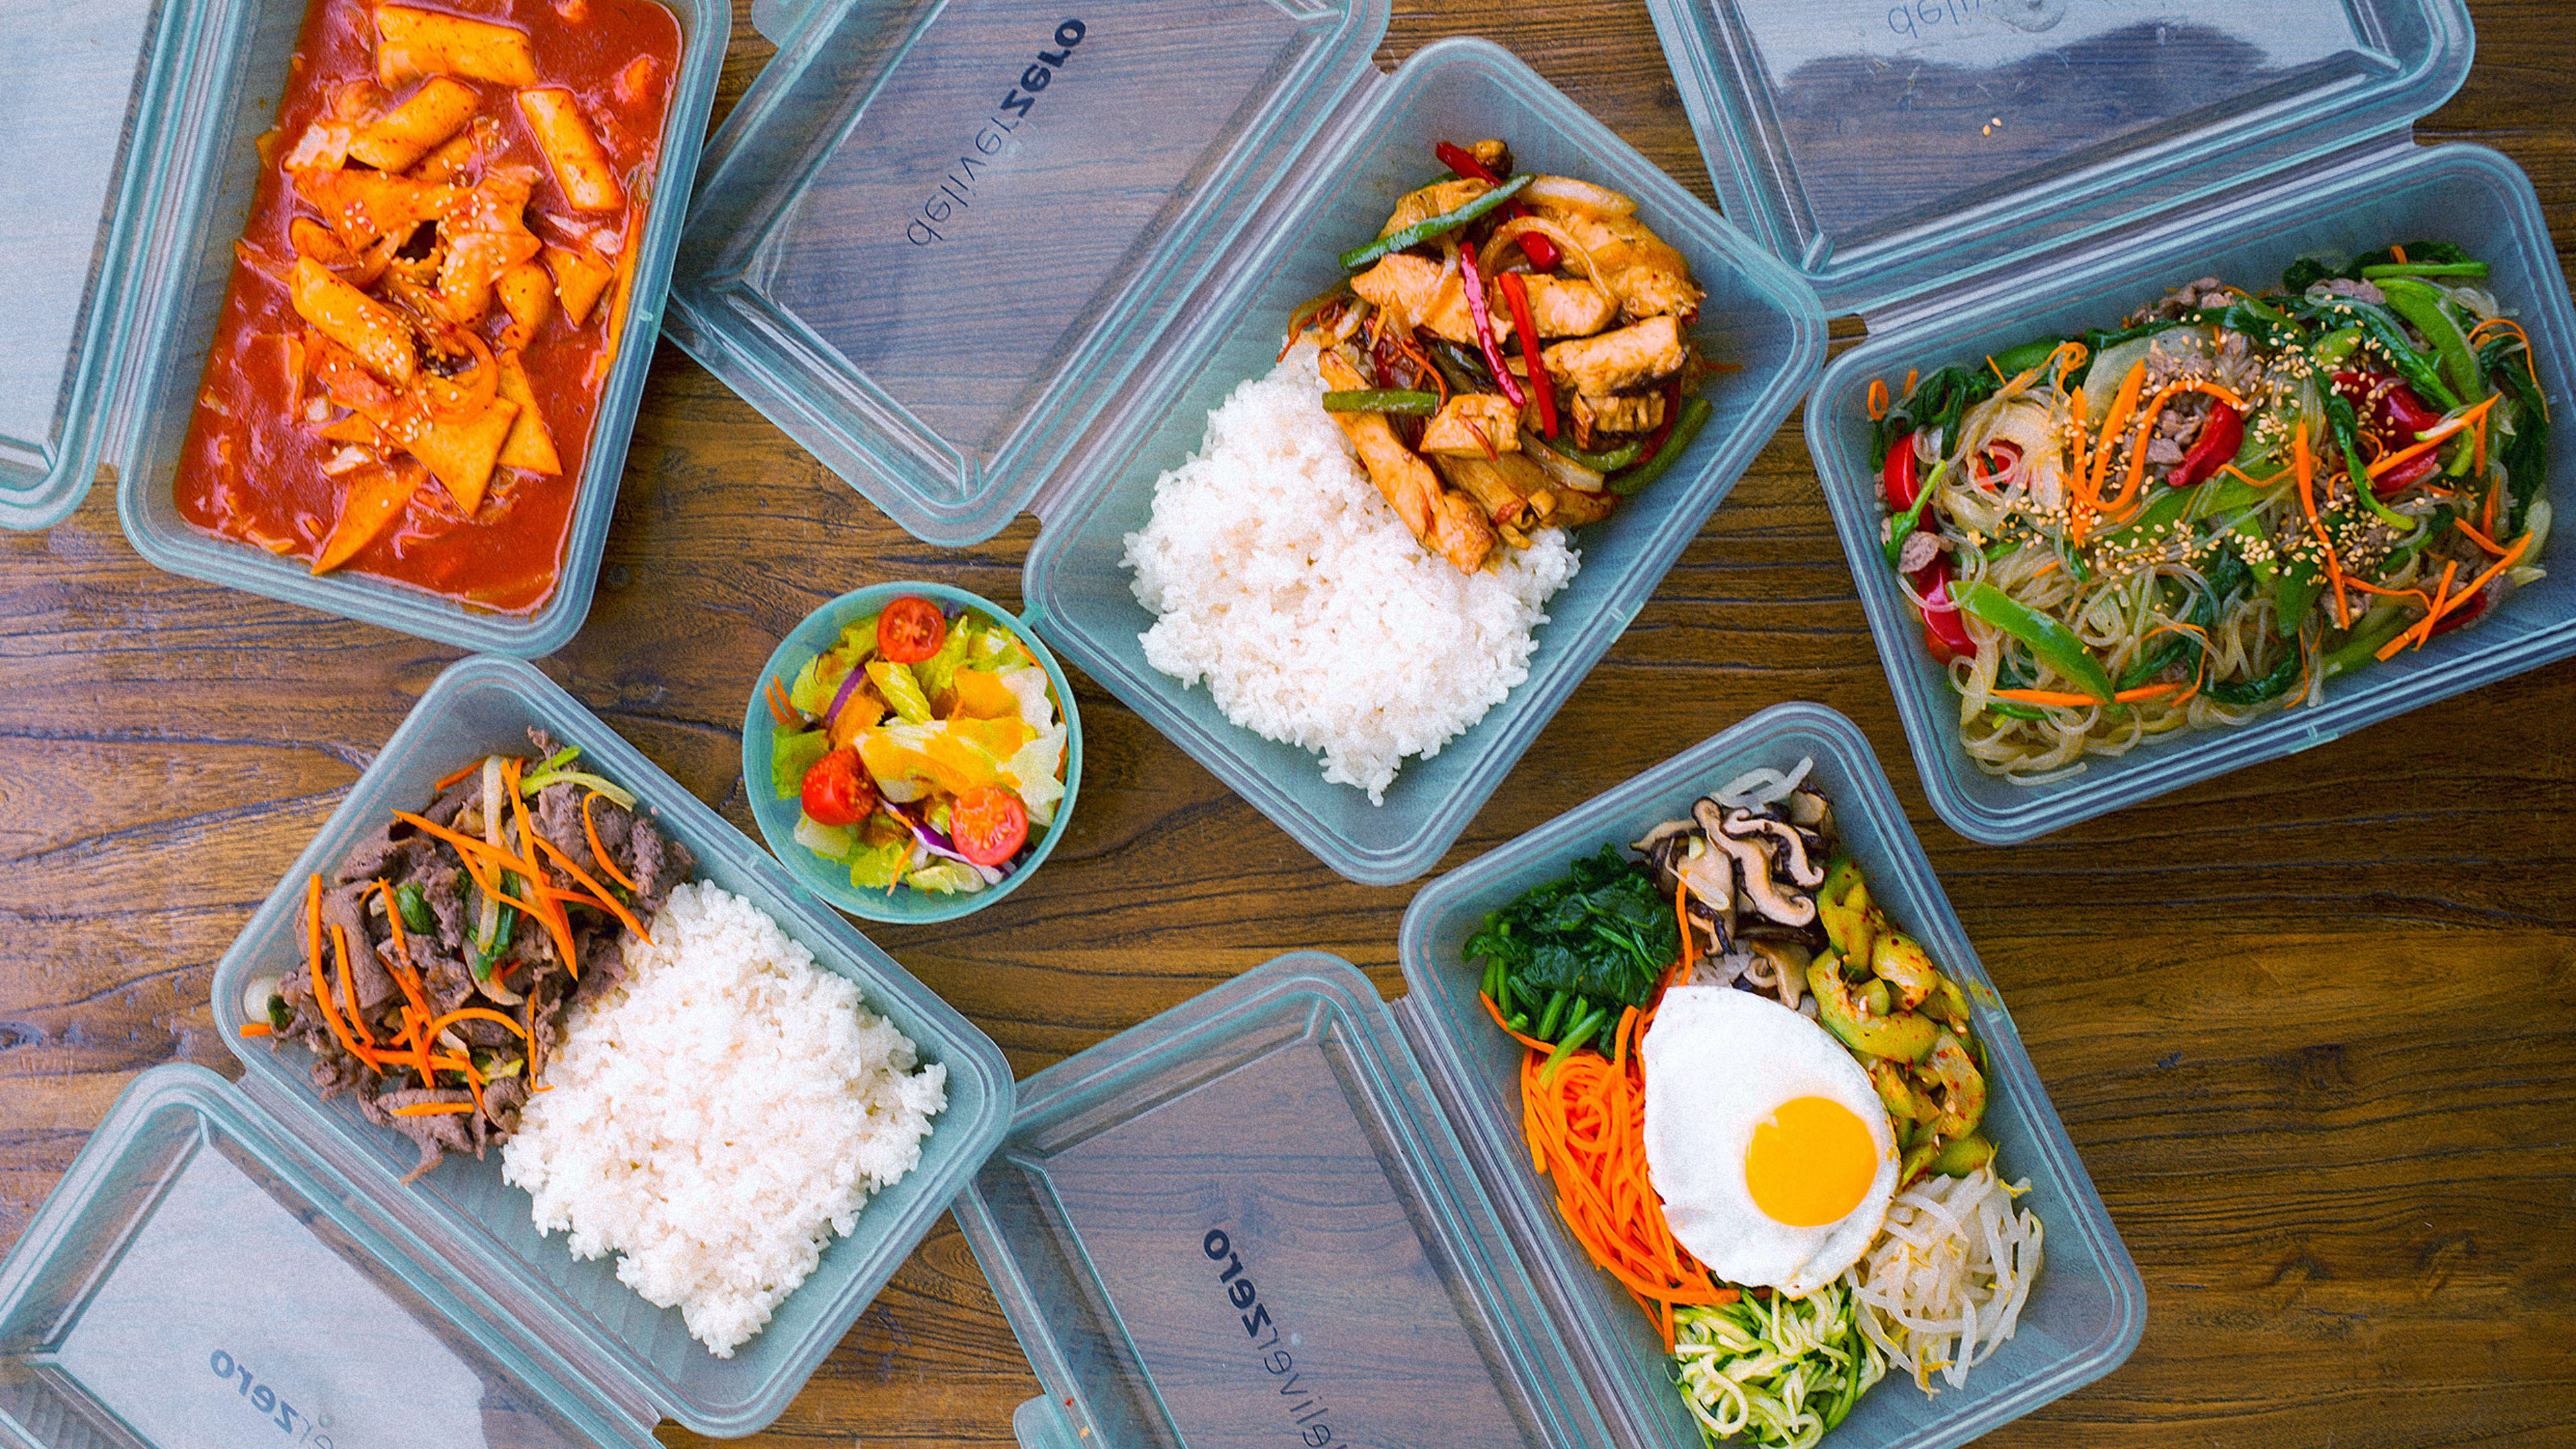 This new delivery service cuts down on takeout waste by sending your food in reusable packaging